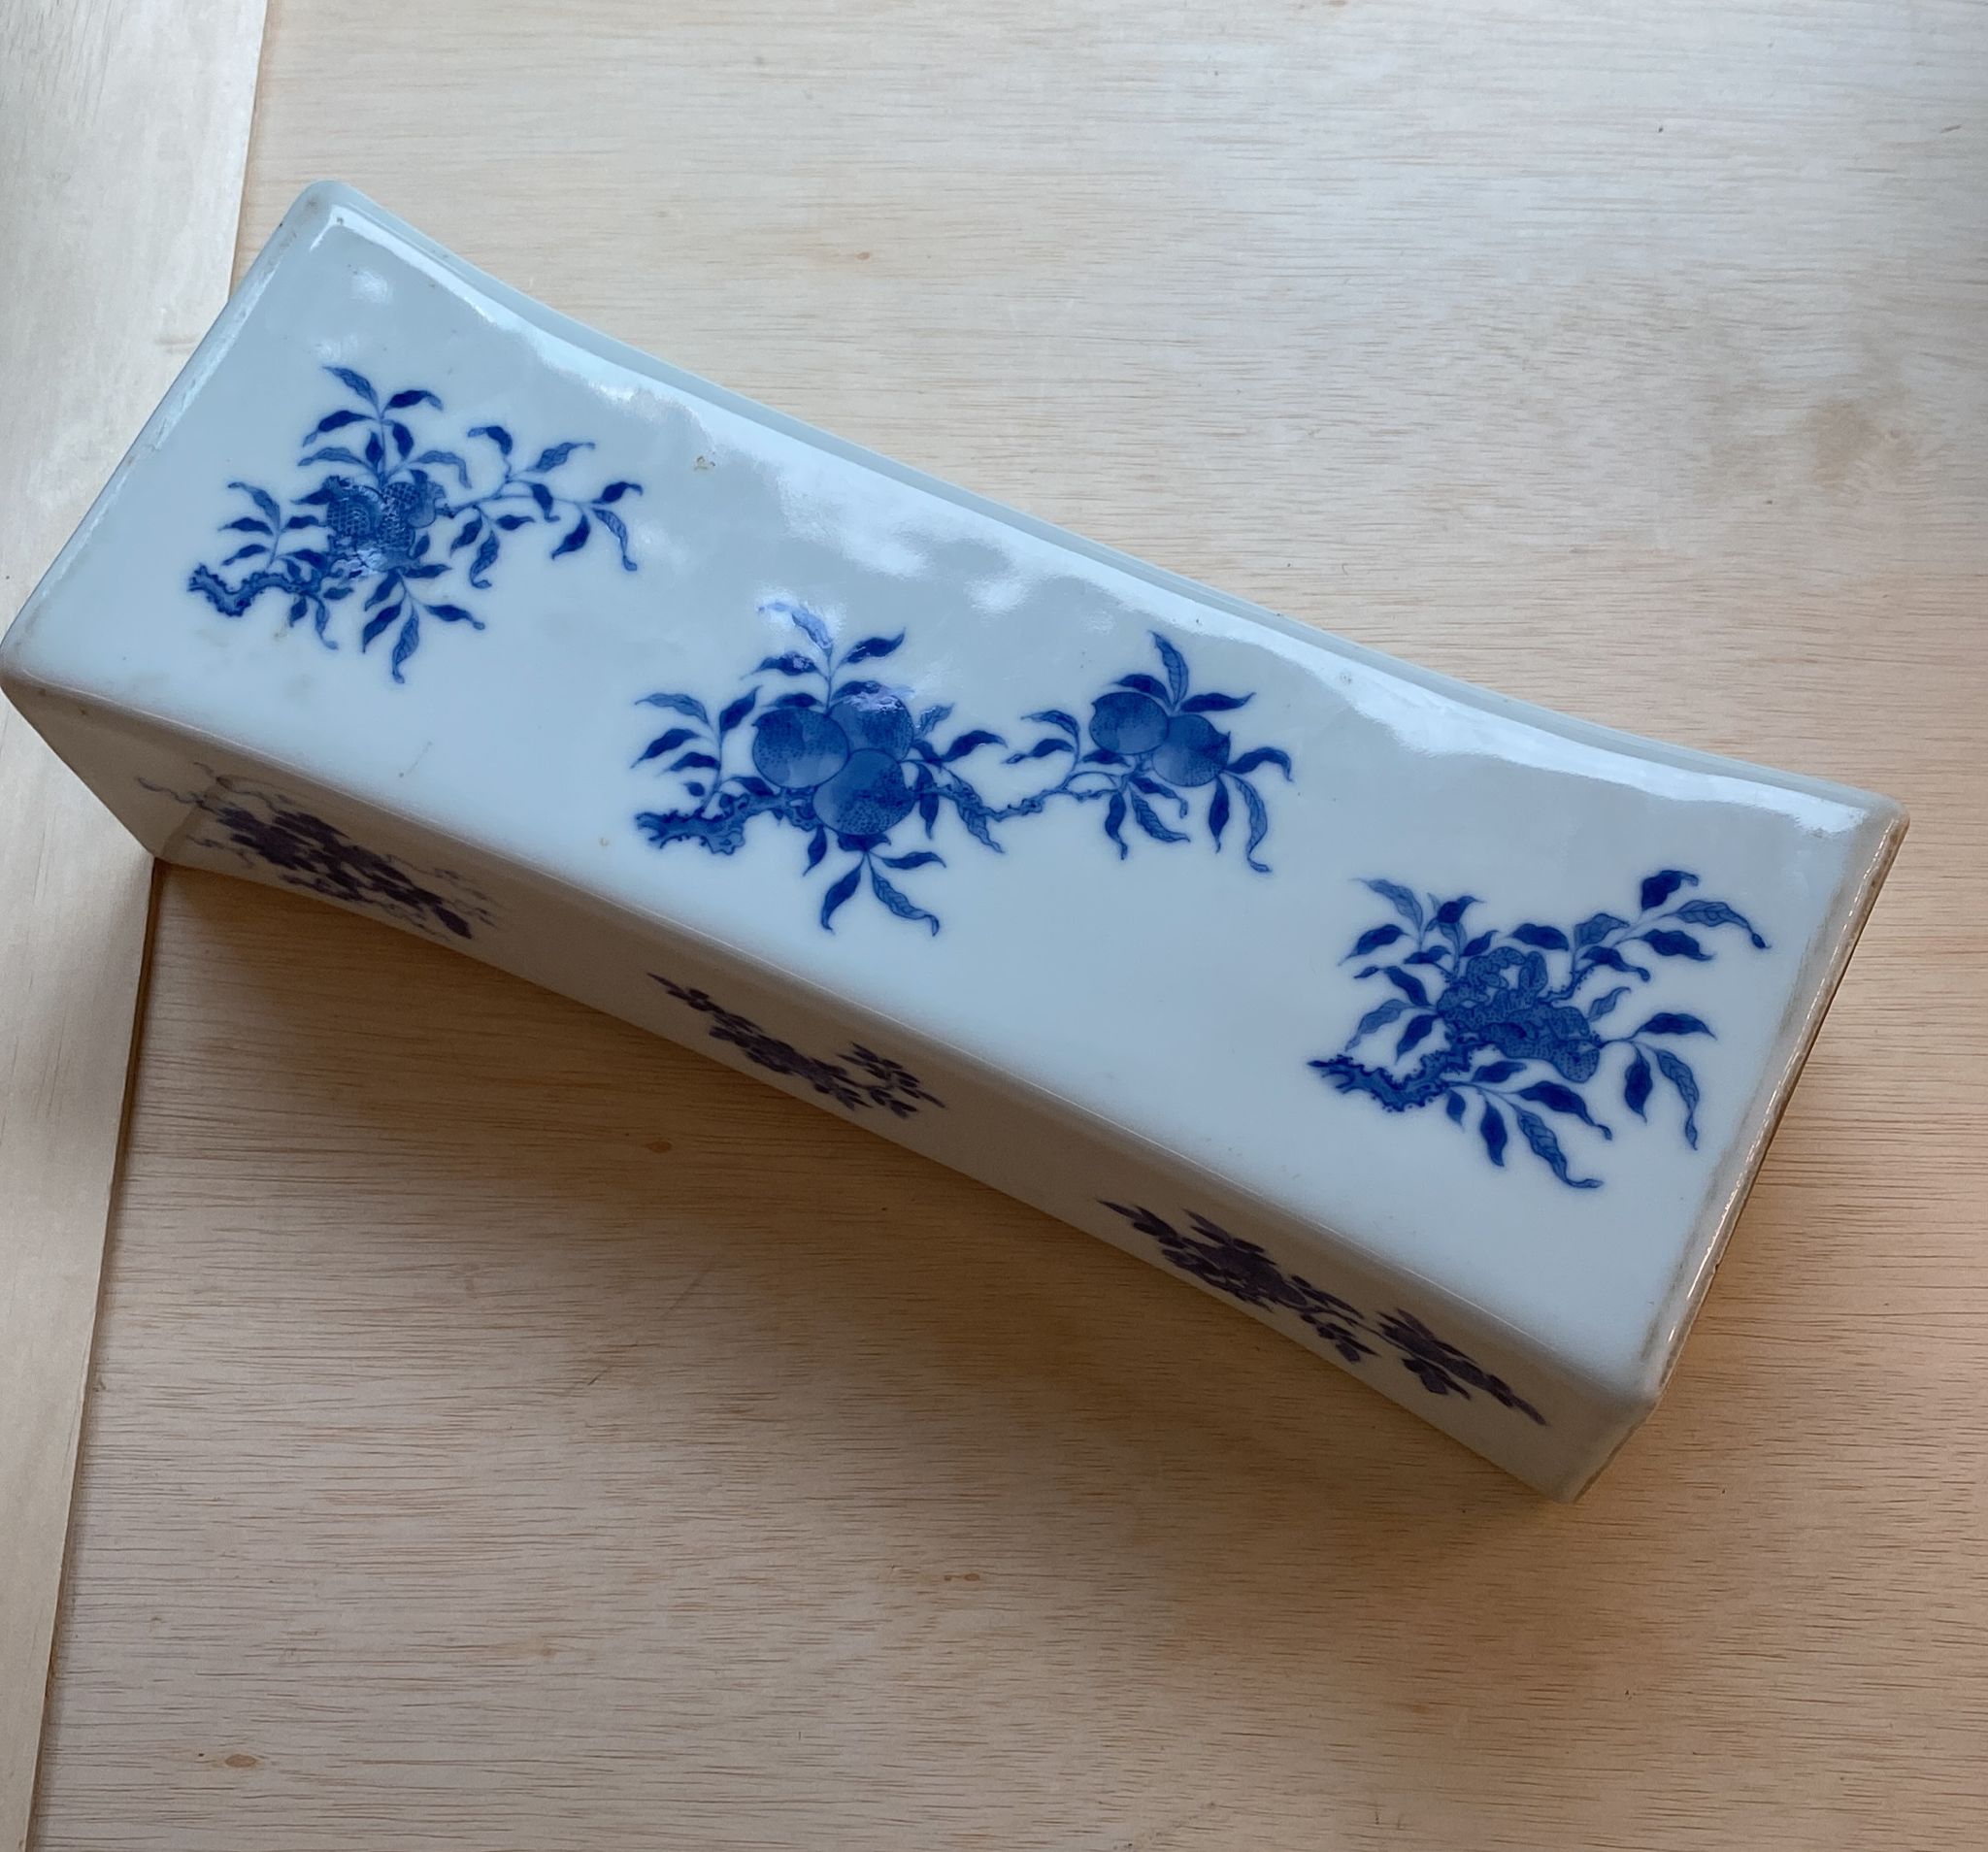 A LARGE BLUE AND WHITE PORCELAIN PILLOW - Image 22 of 24